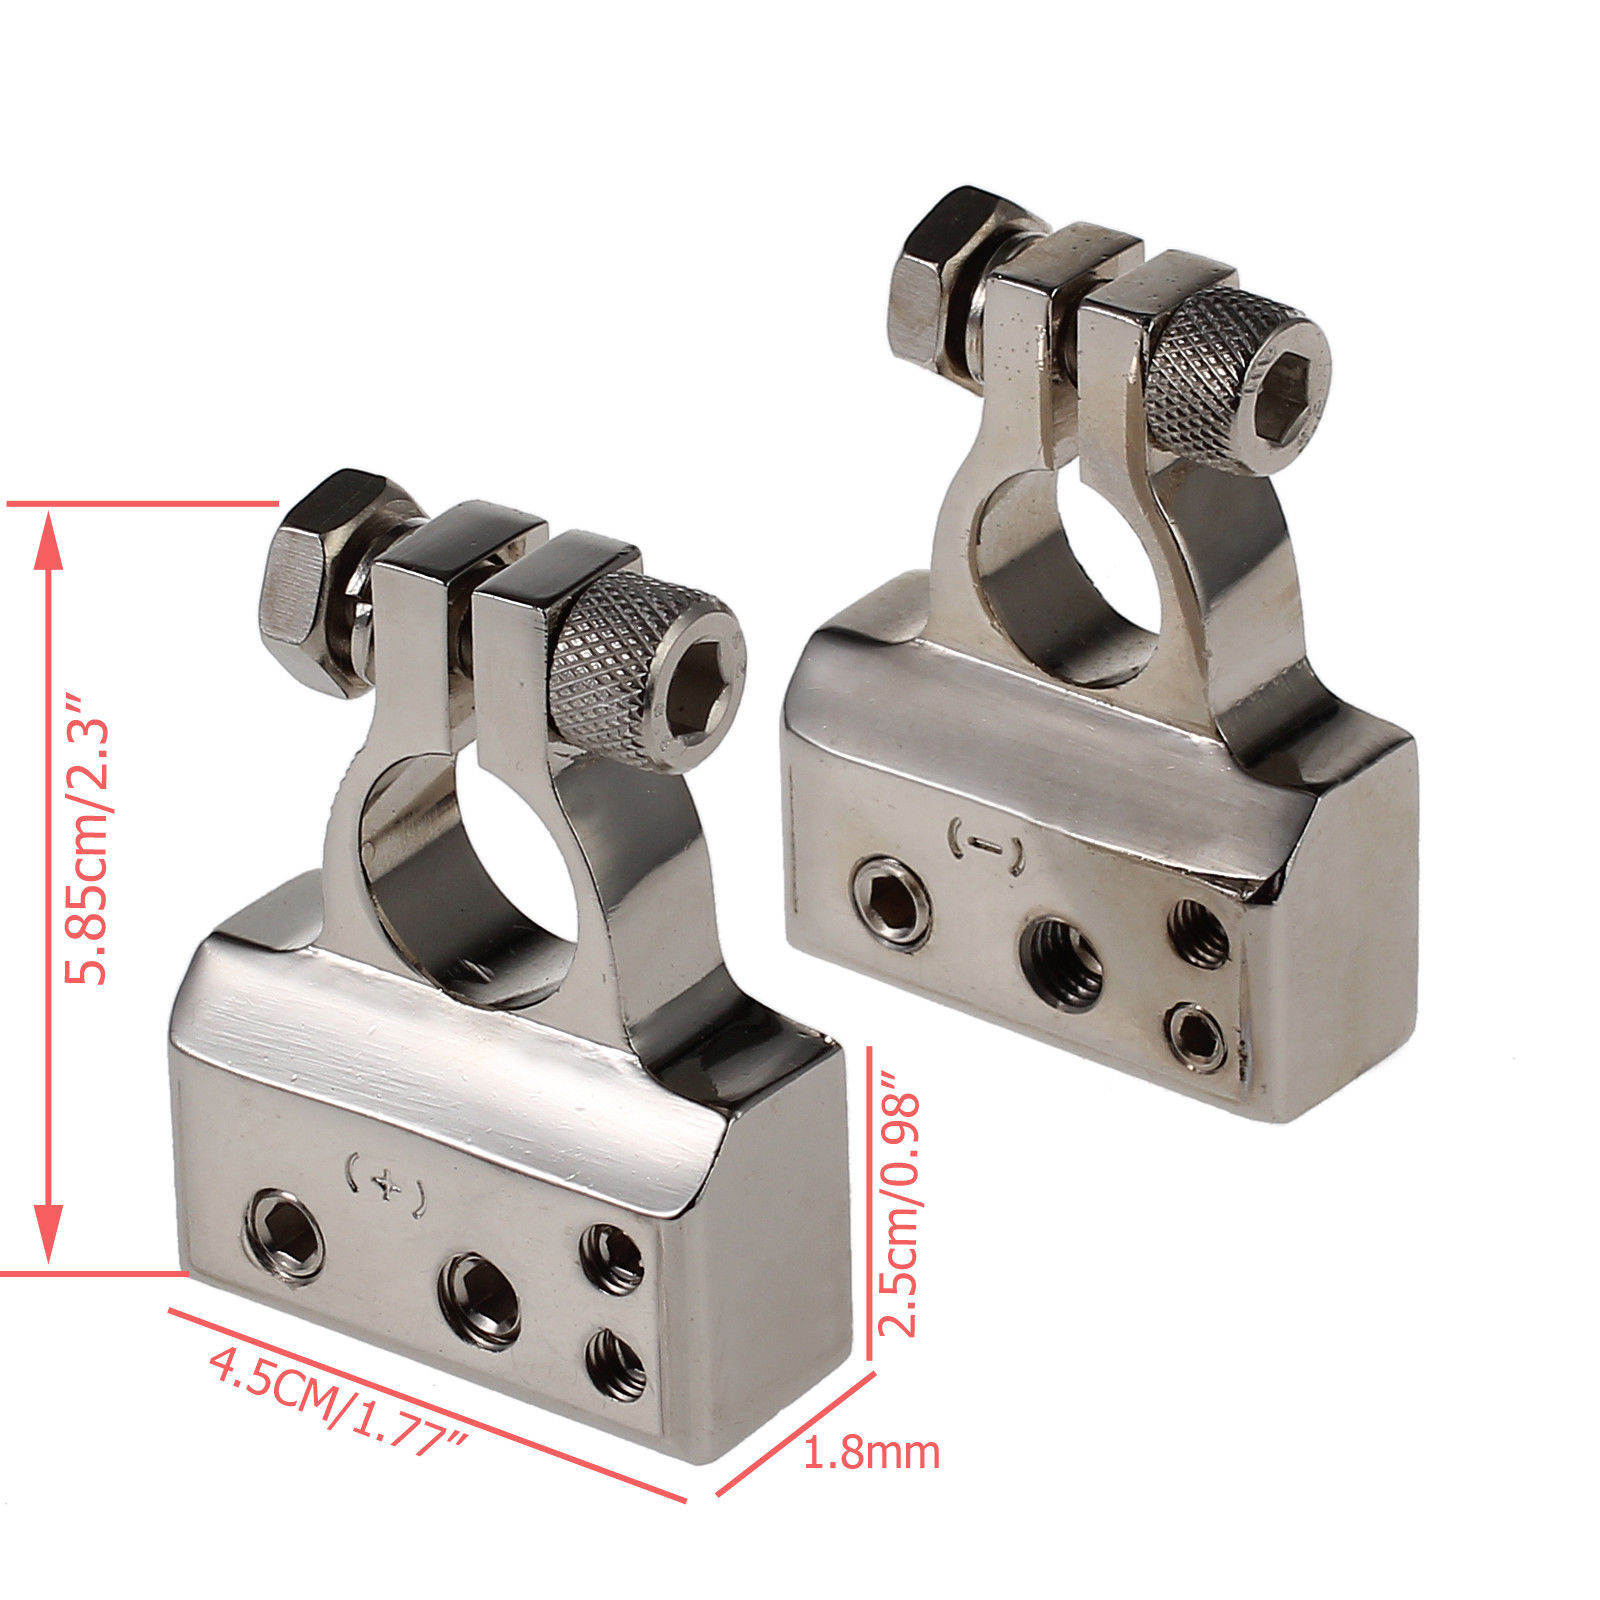 2X Silver Heavy Duty Plated Car Battery Terminals Positive + Negative Connectors 859256005020 | eBay